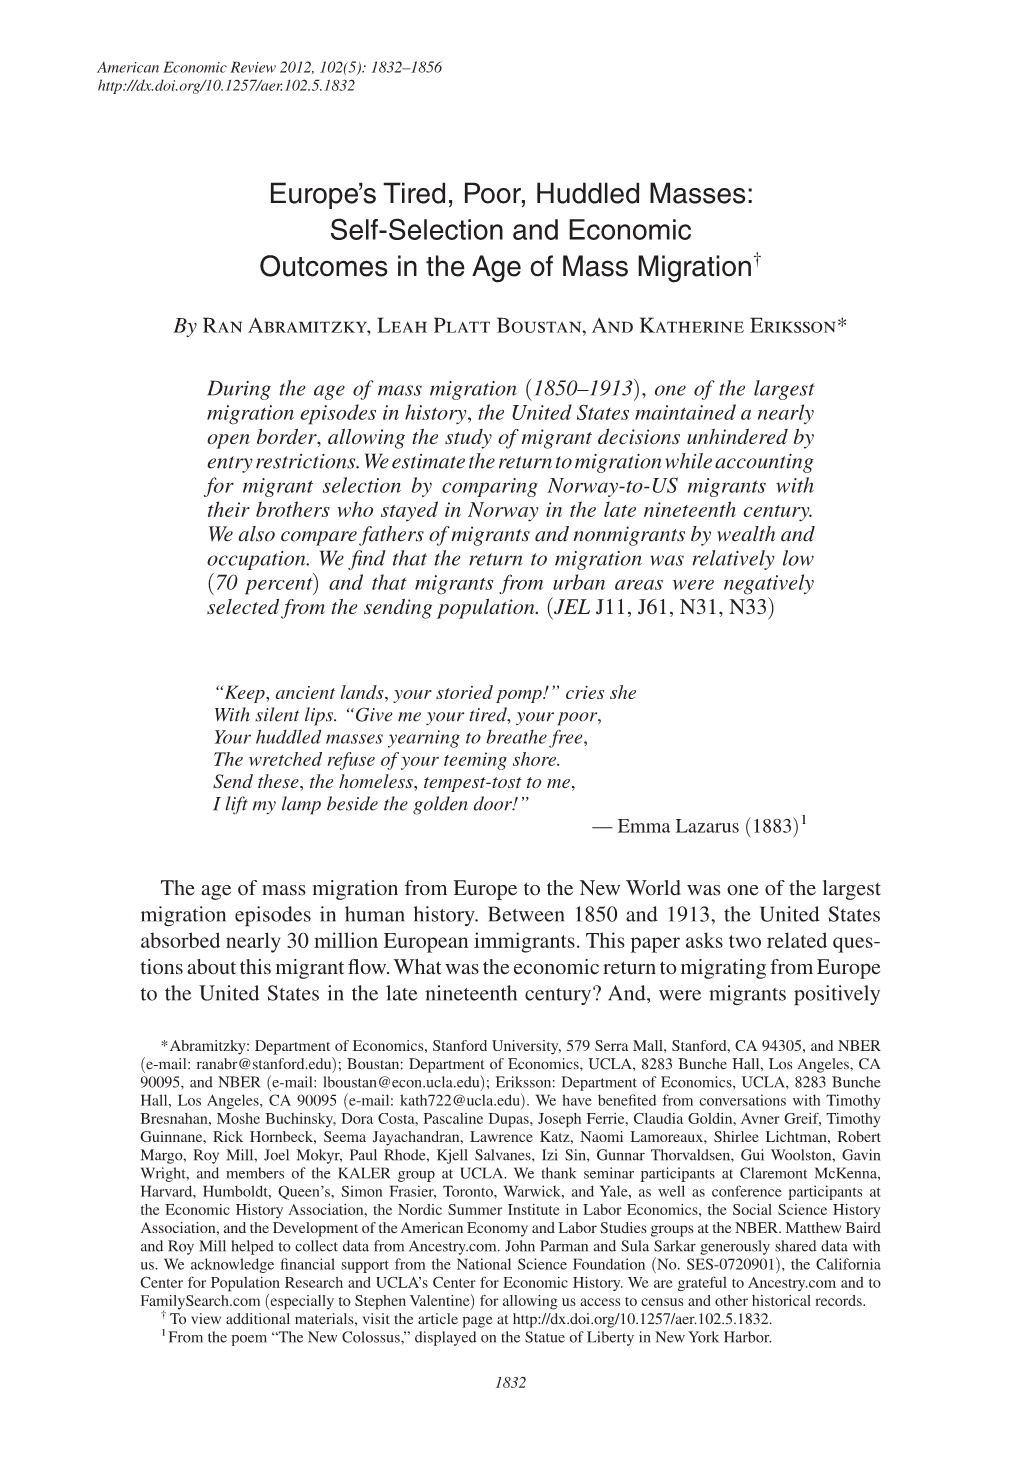 Europe's Tired, Poor, Huddled Masses: Self-Selection and Economic Outcomes in the Age of Mass Migration